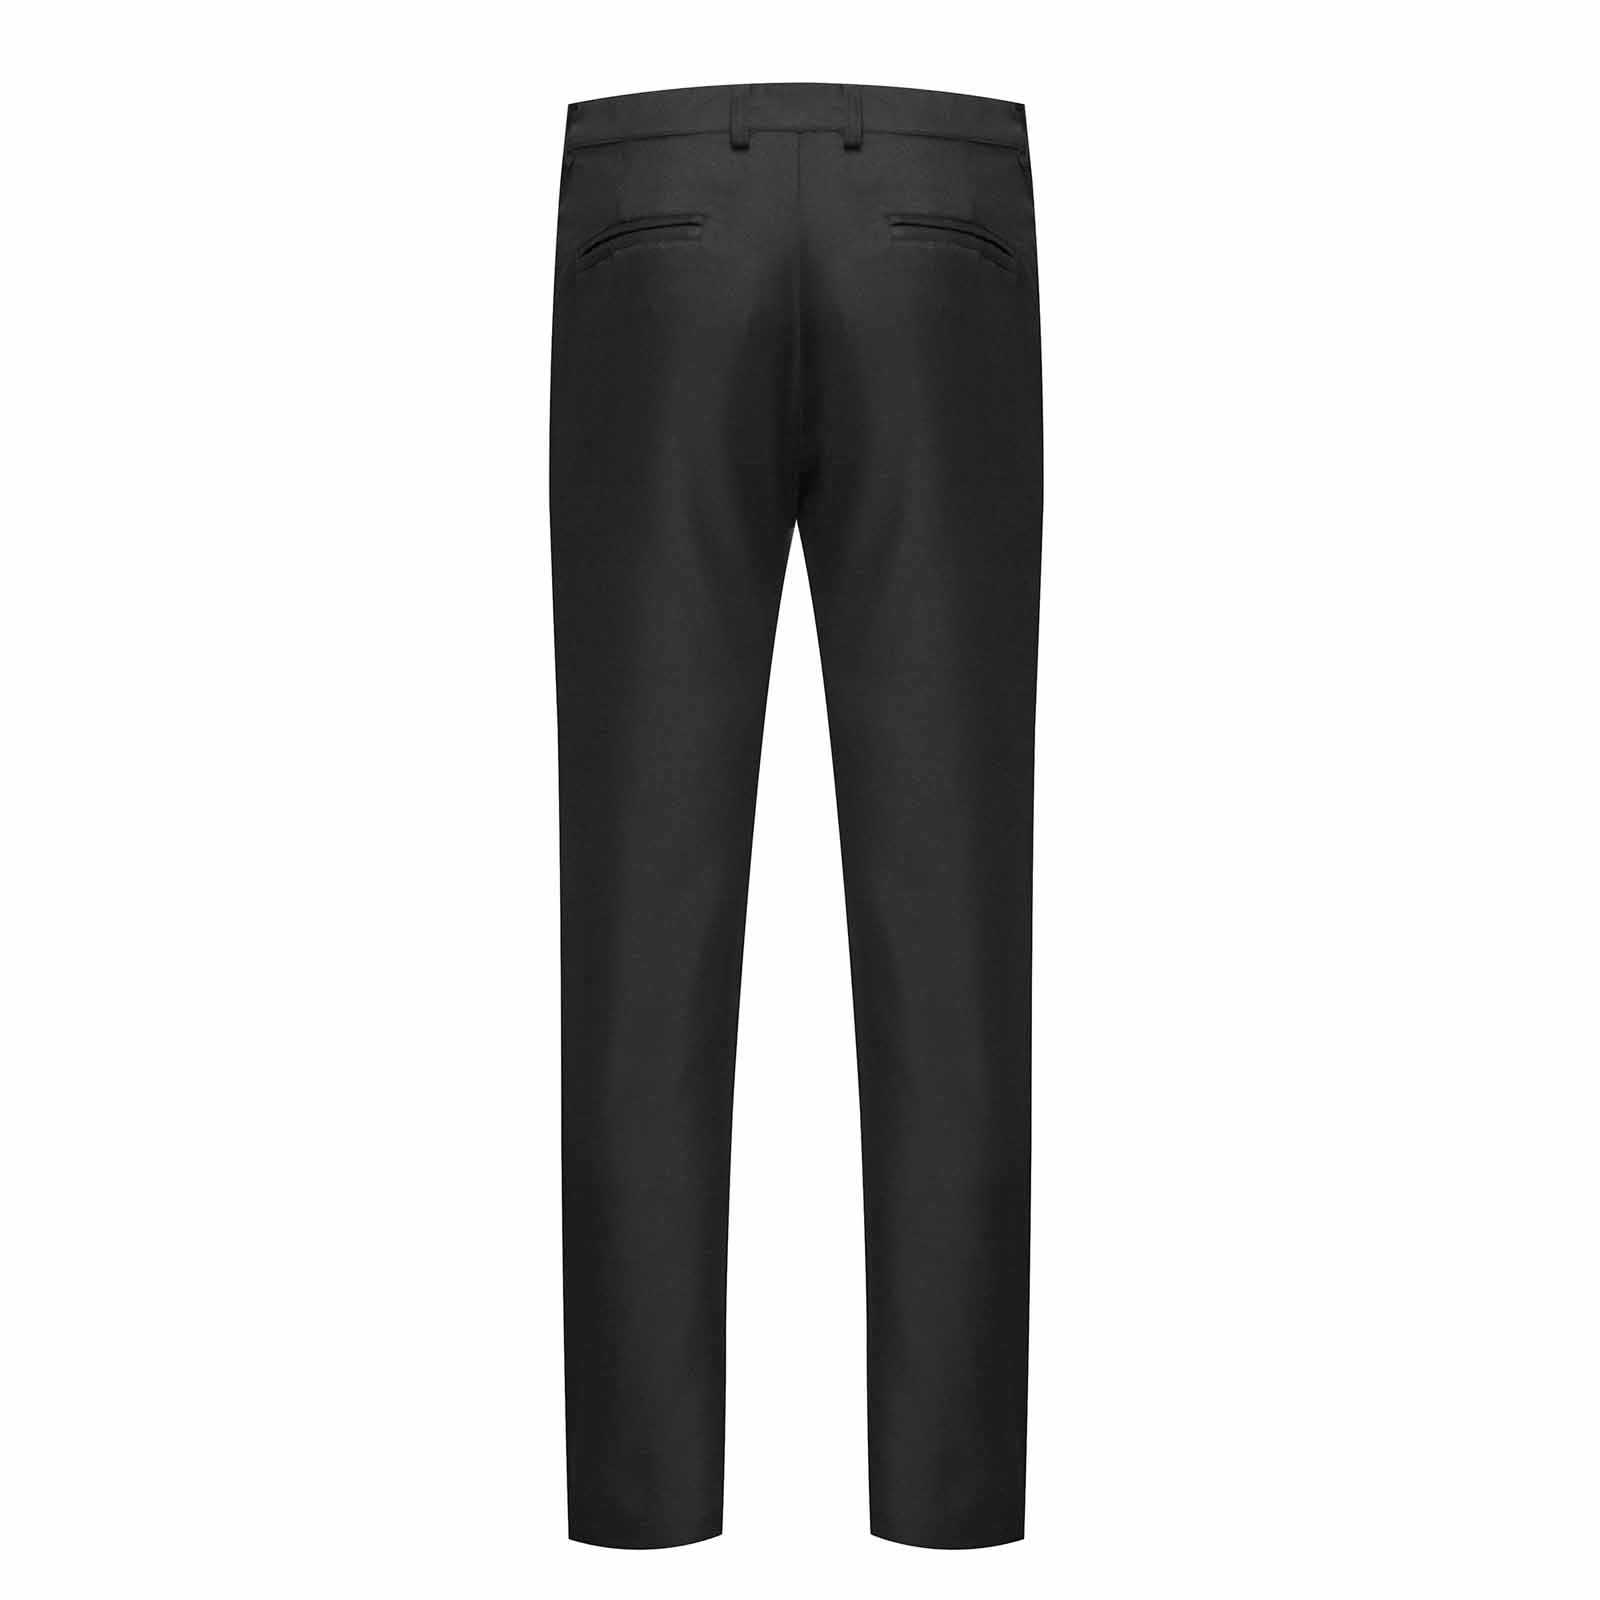 JNGSA Men's Slim-Fit Dress Pant Straight-Leg Flat-Front Trousers Business  Casual Suit Pants for Daily Holiday Formal Black XXXL Clearance 